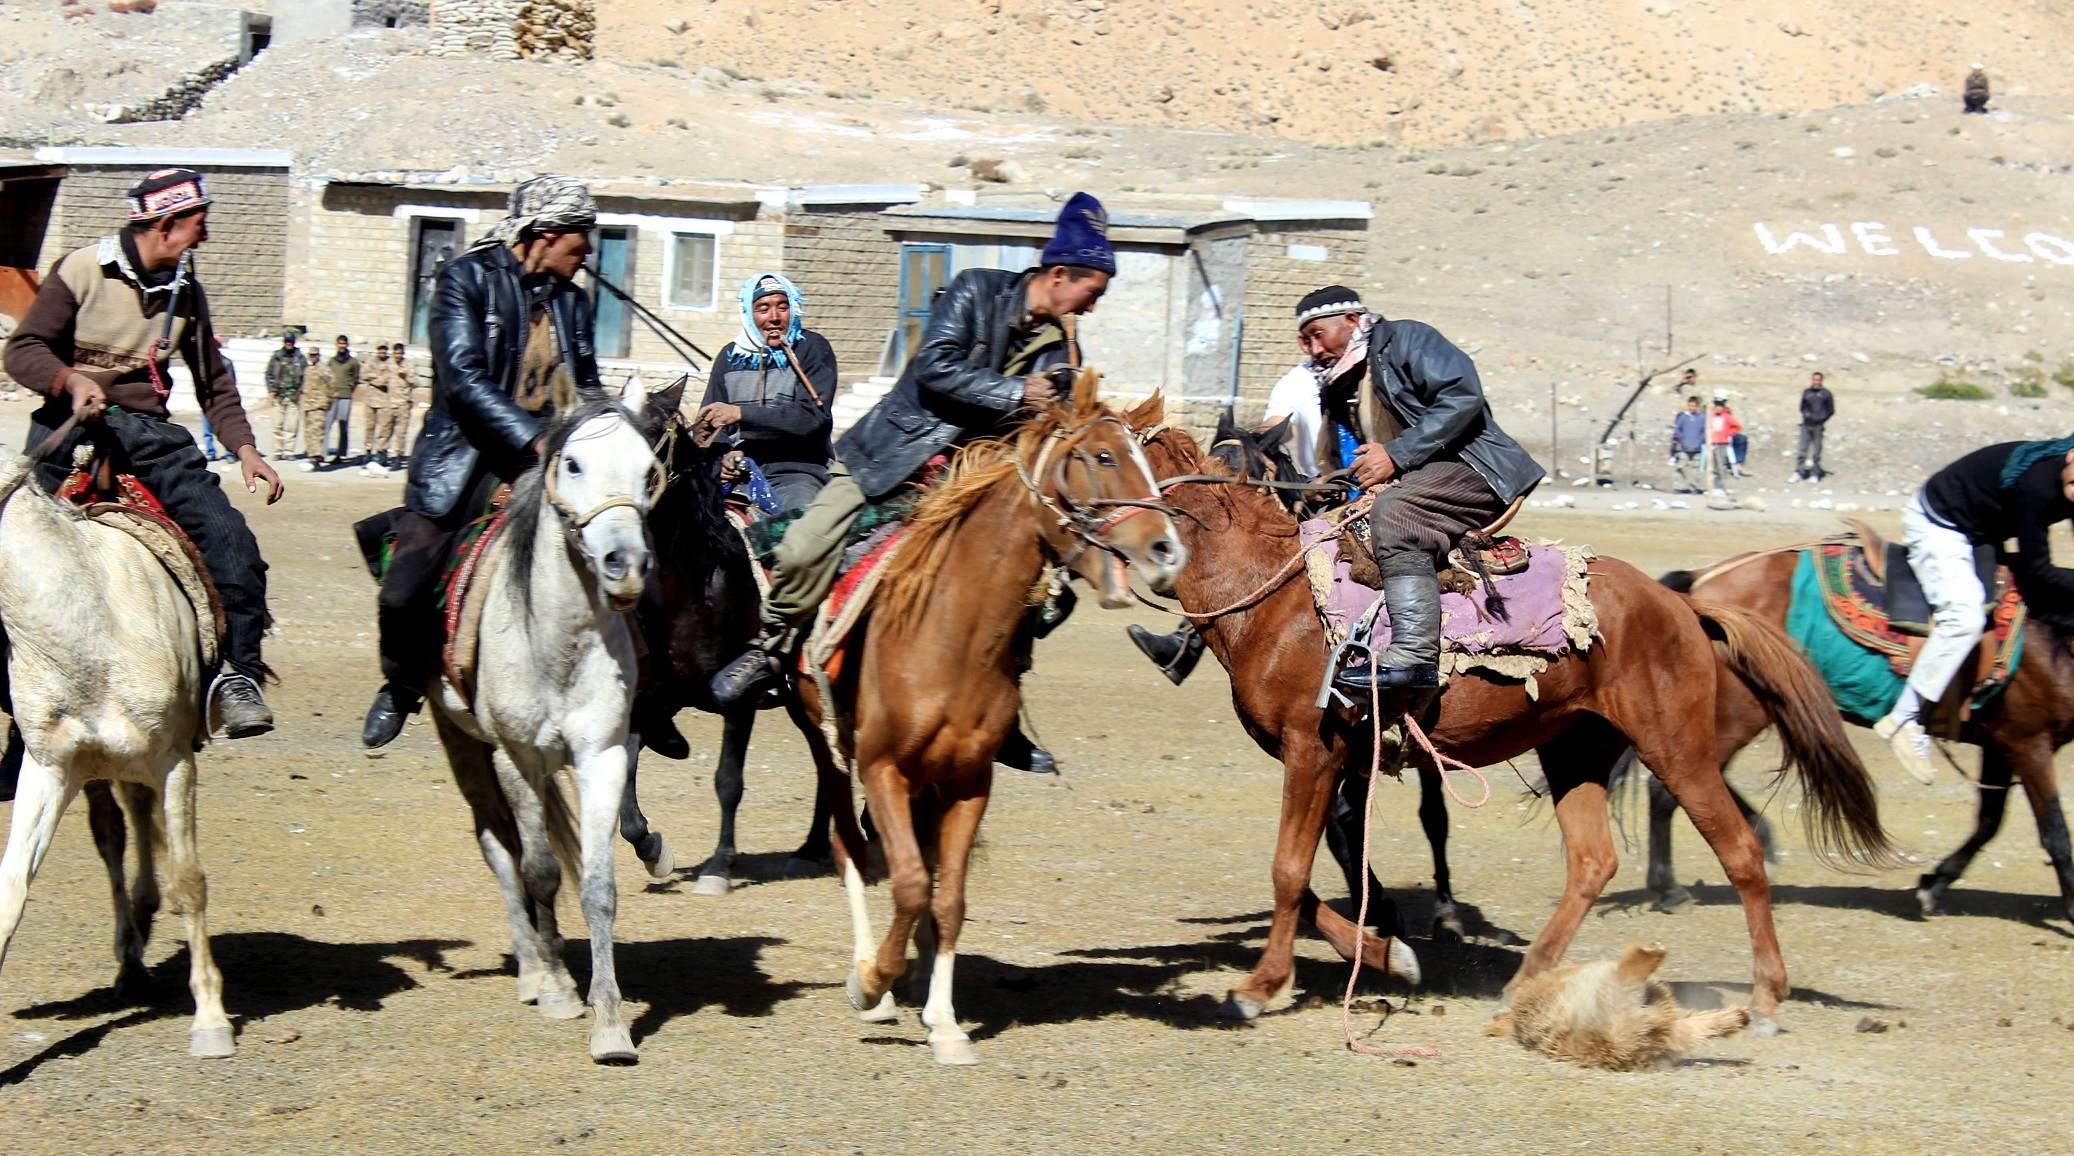 Players from the Wakhn region busy in playing Buzkashi, a traditional game played on horses 